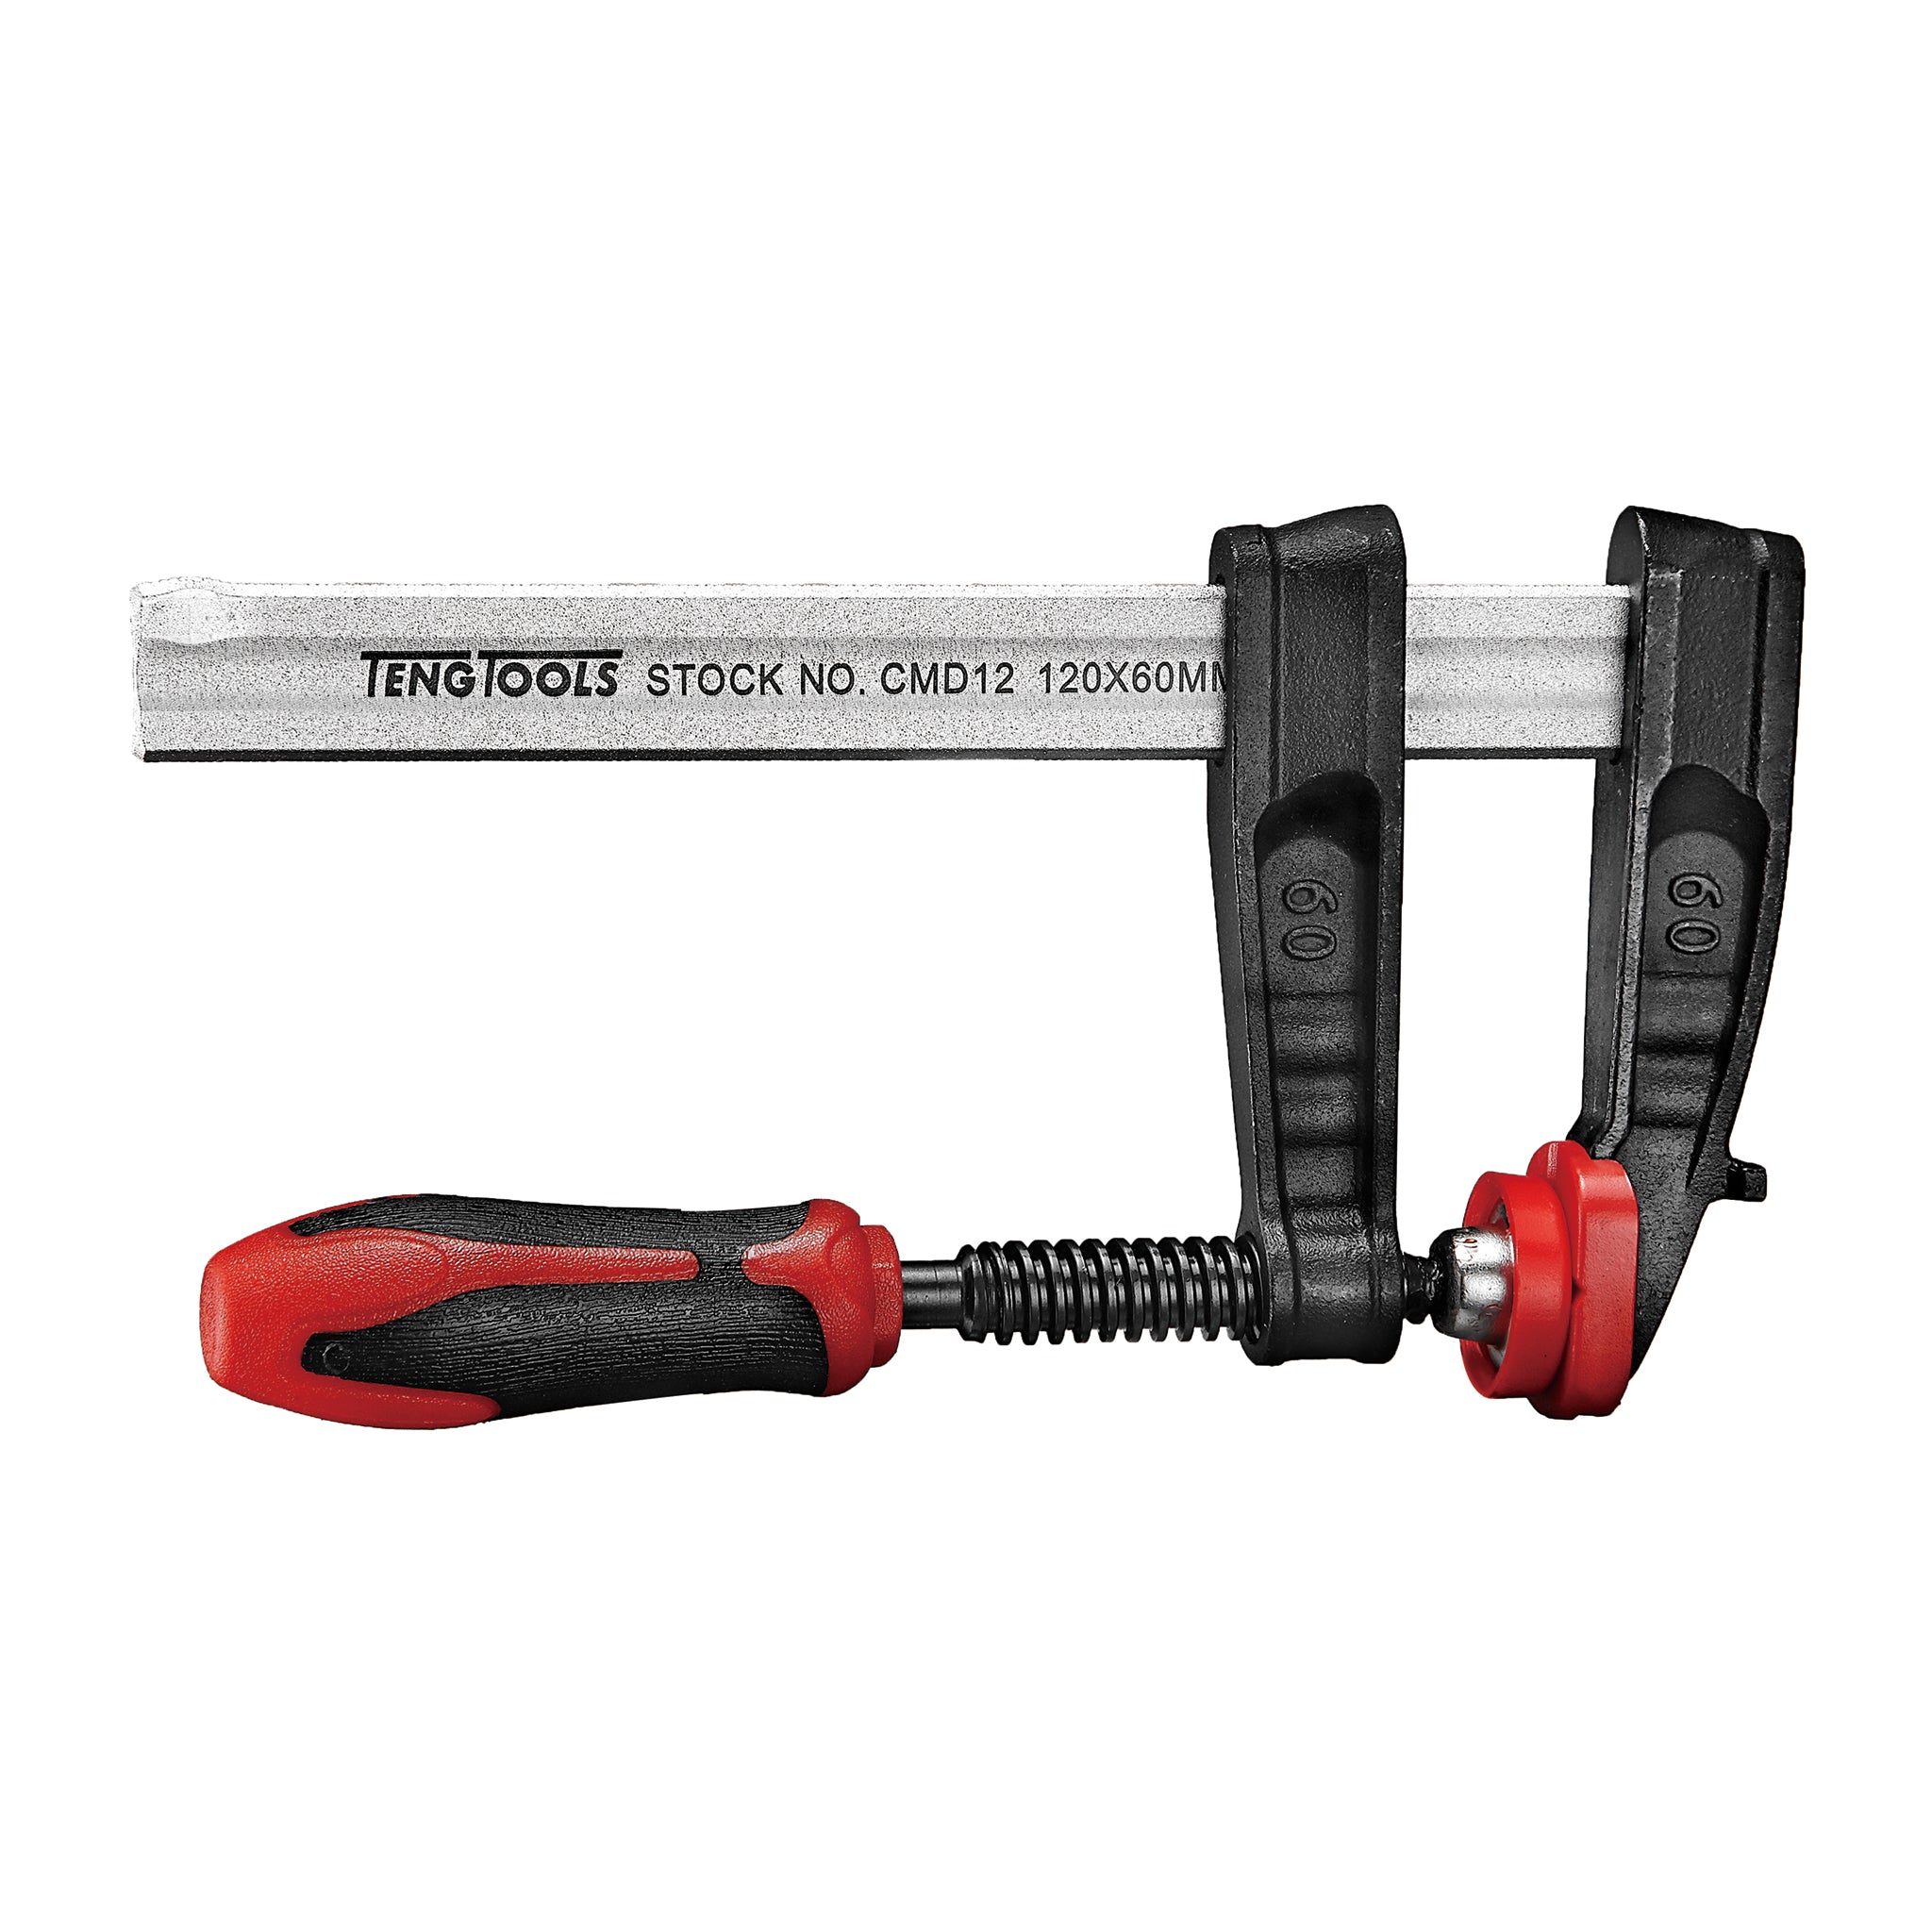 Teng Tools F-Clamps With Bi Material Handles - 300x120MM